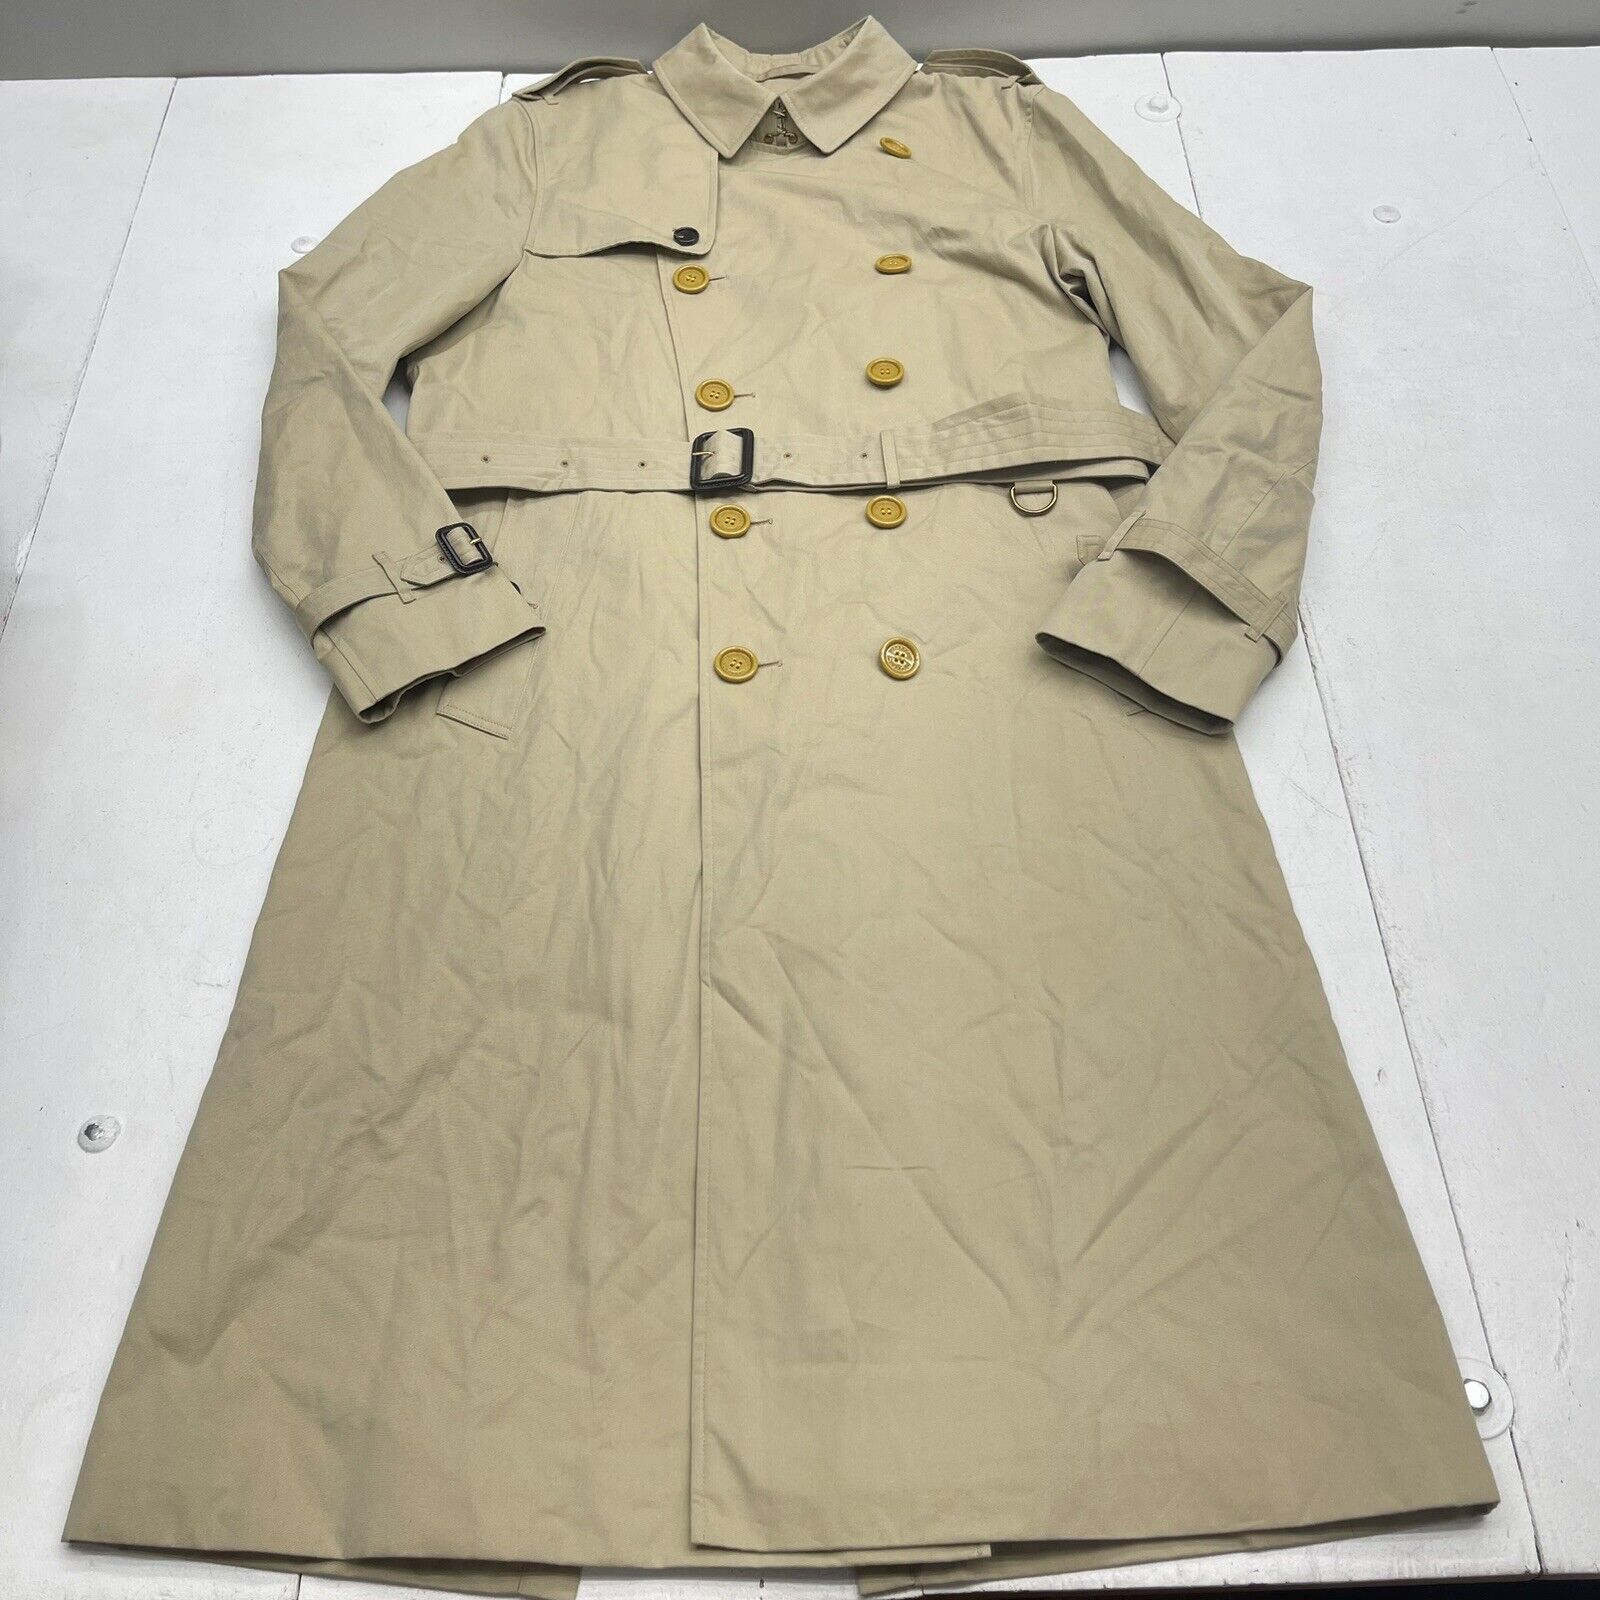 Burberry Long Heritage Belted Trench Coat Honey Tan Mens Size 52 US 42 Large